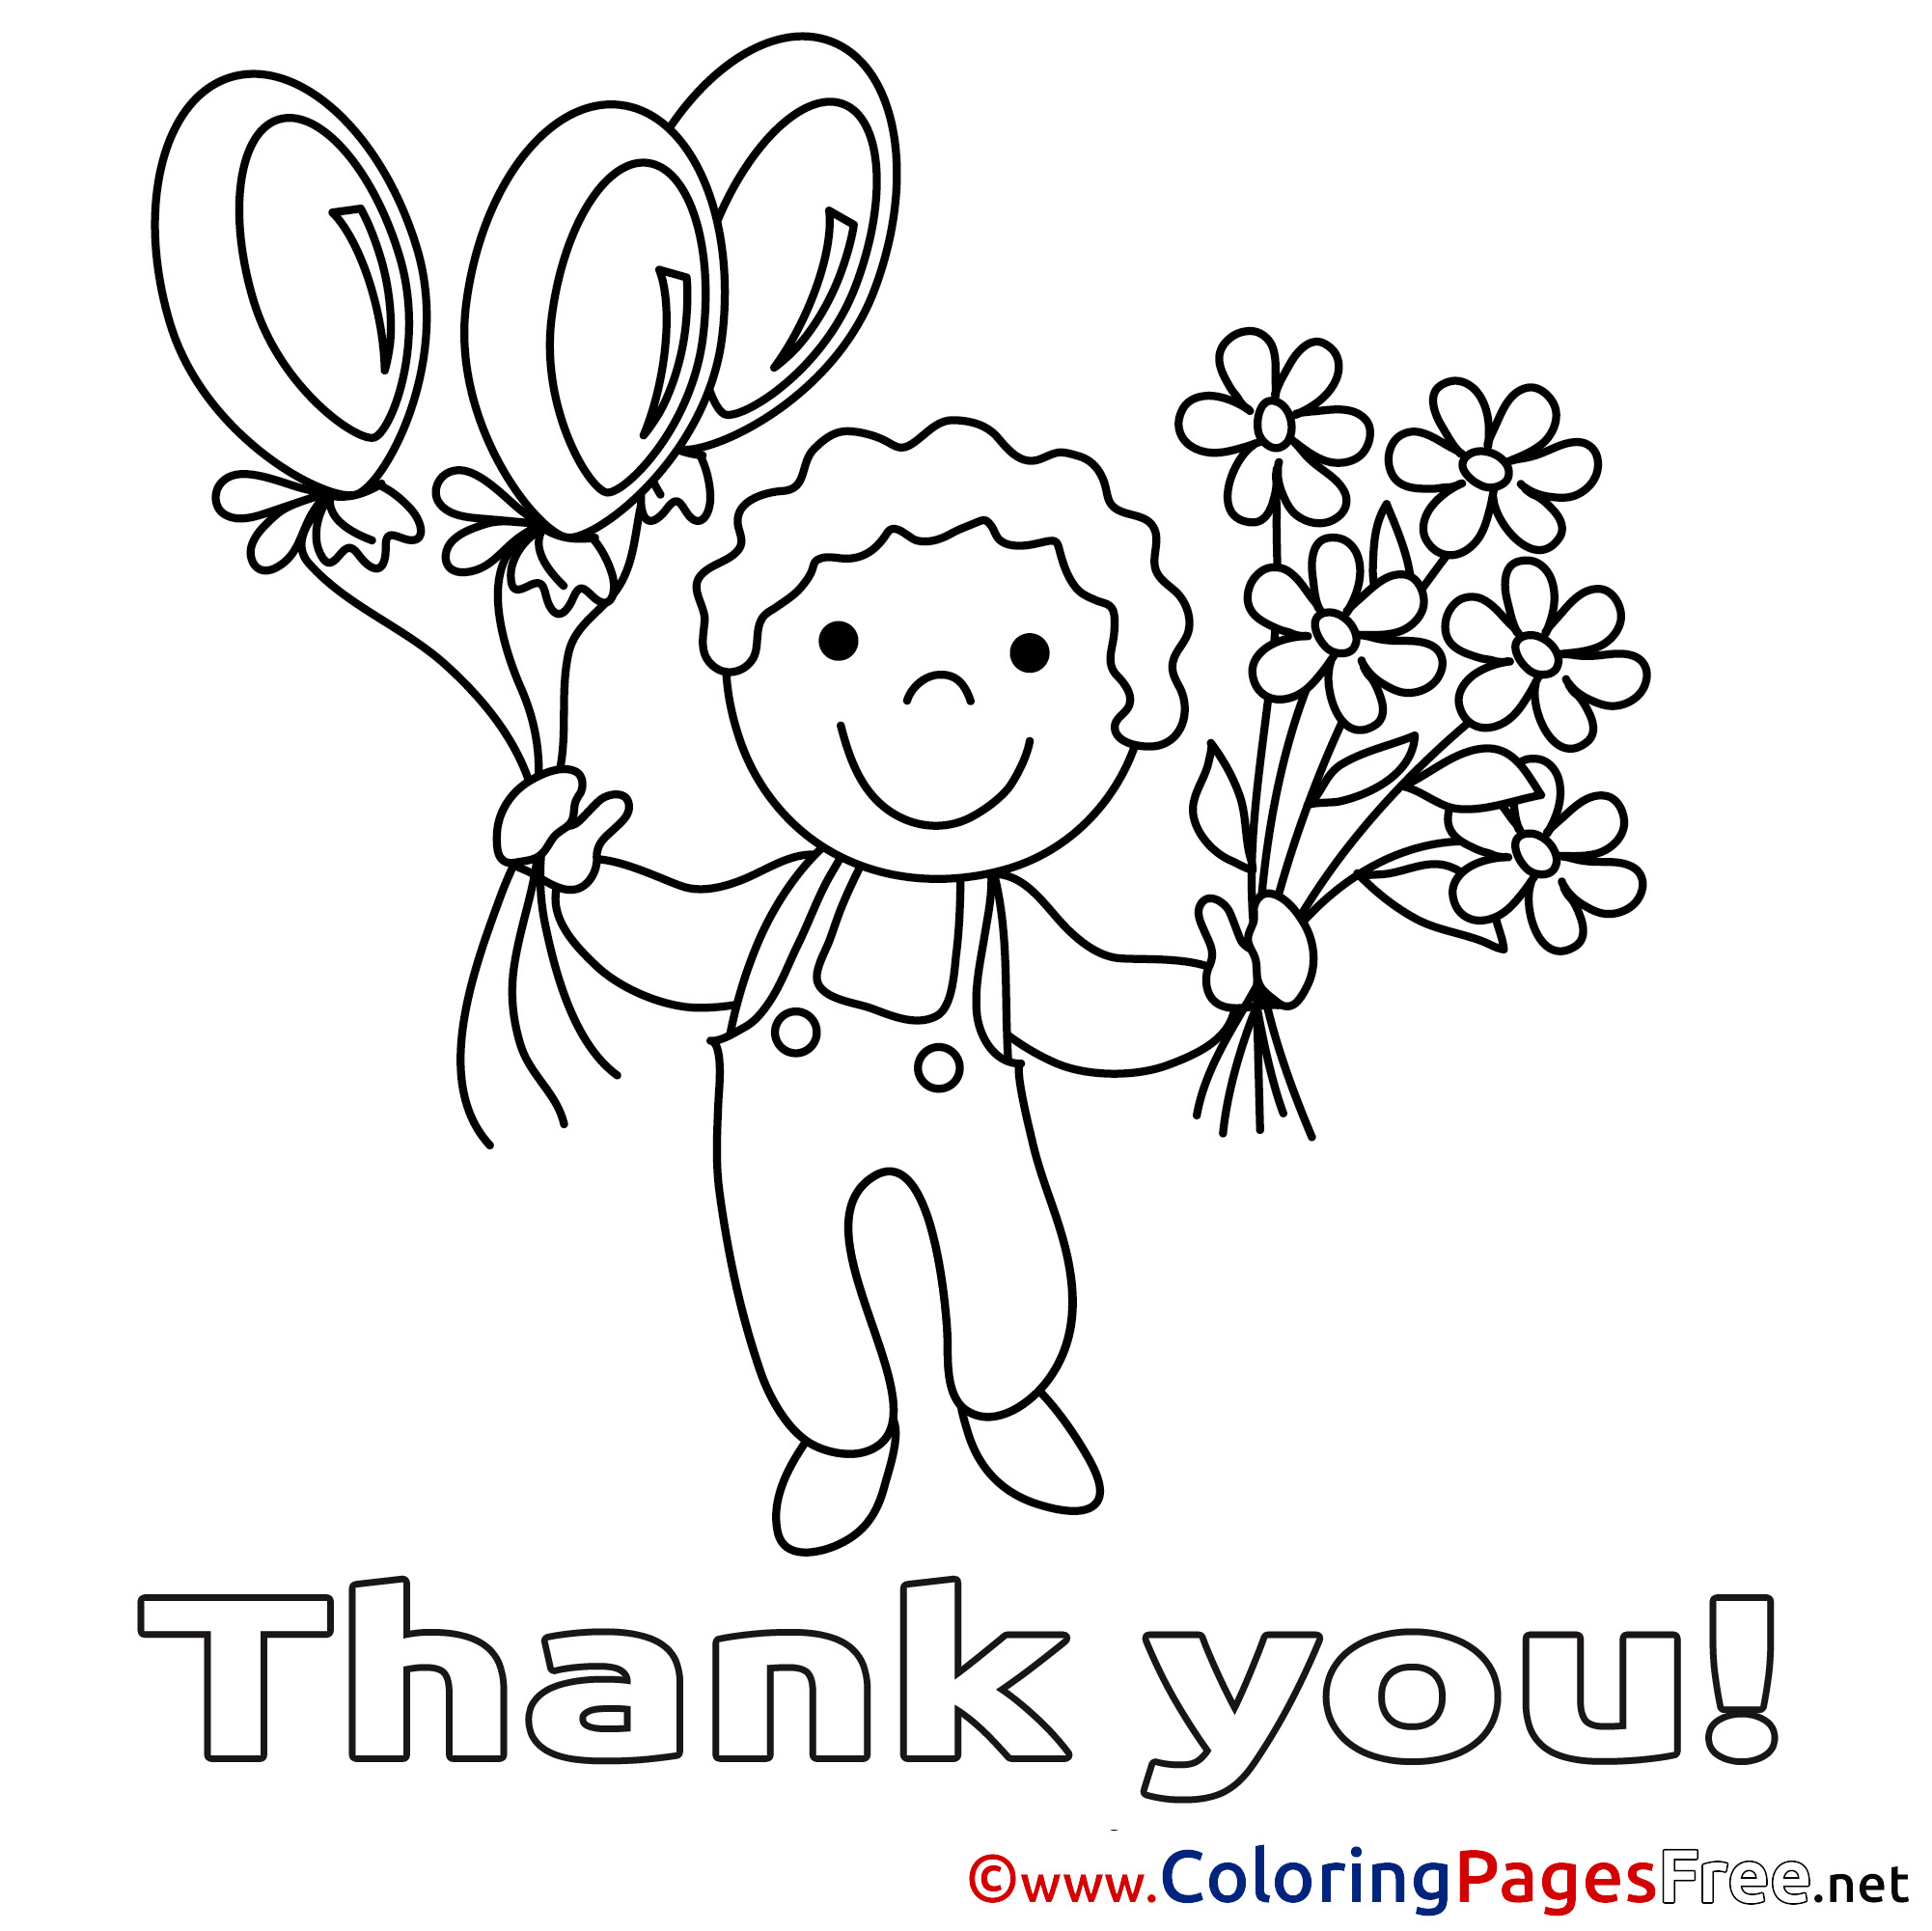 thank-you-card-coloring-printable-thank-you-mom-coloring-pages-at